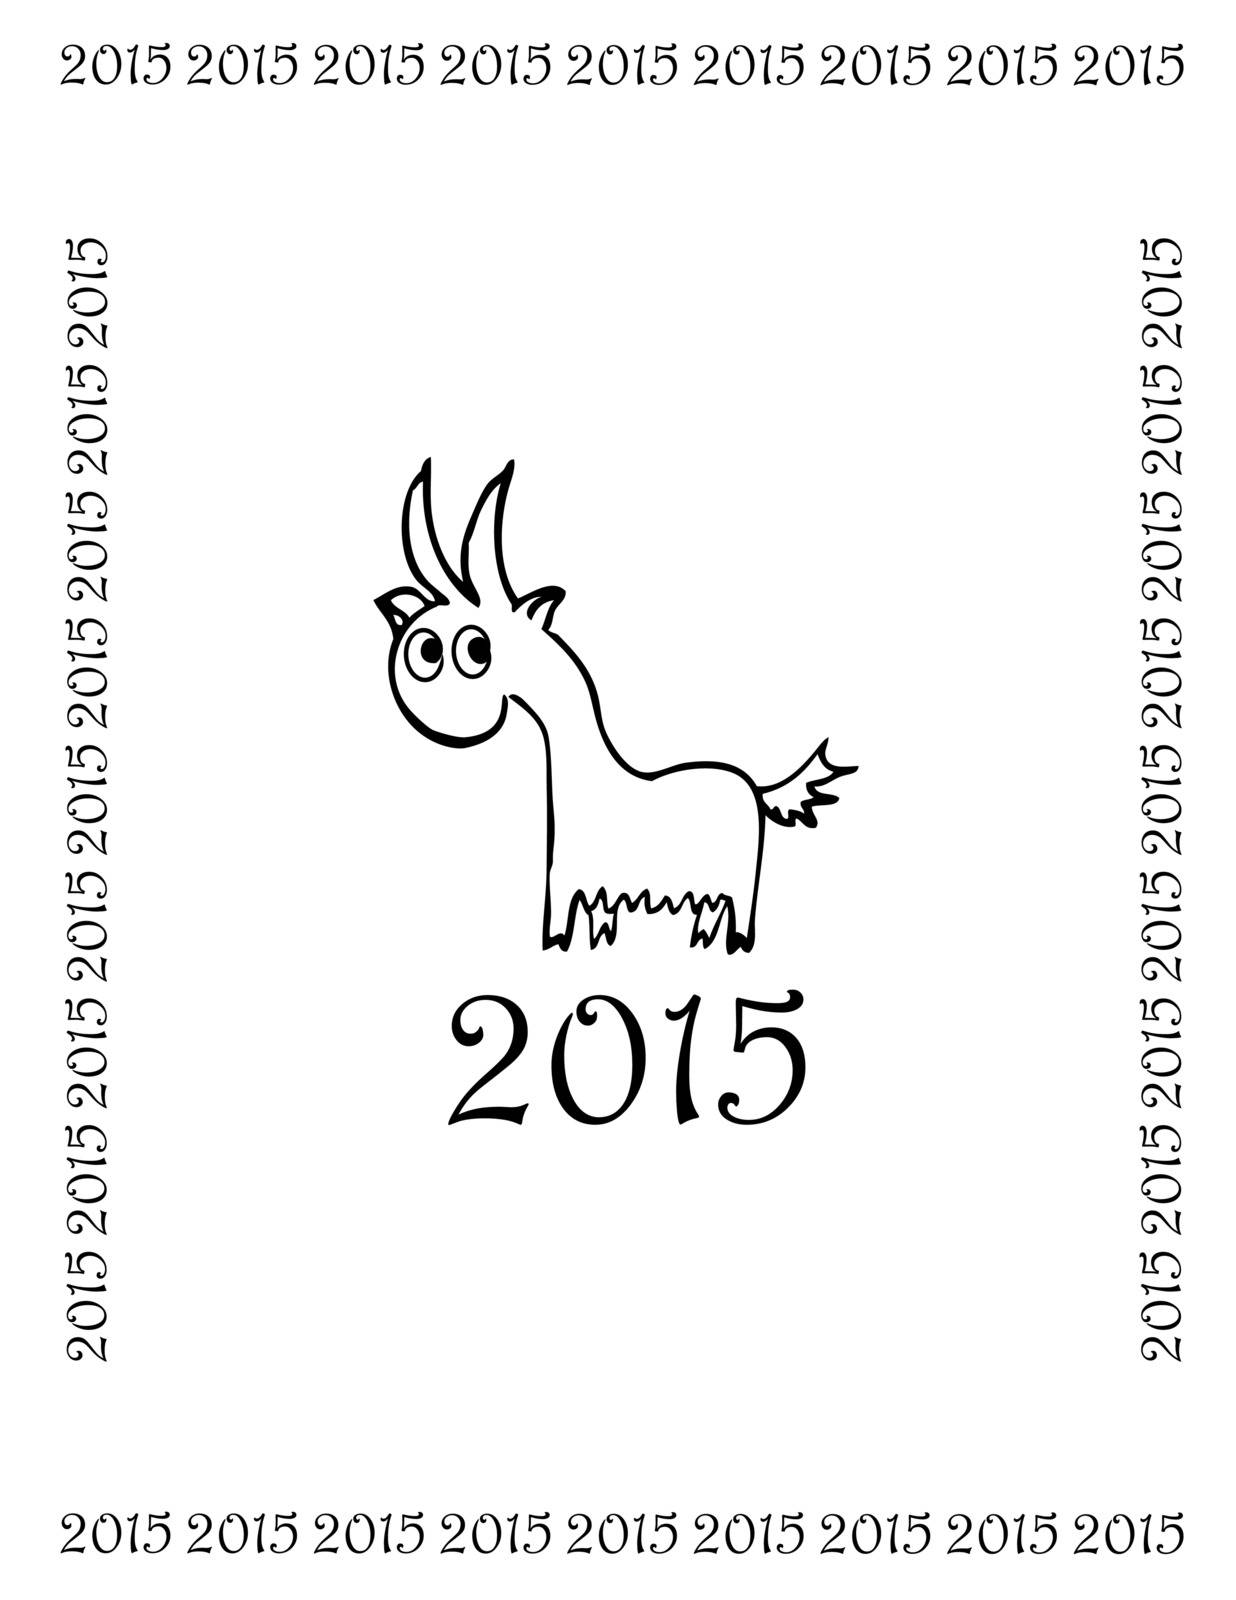 funny goat as a symbol of new 2015